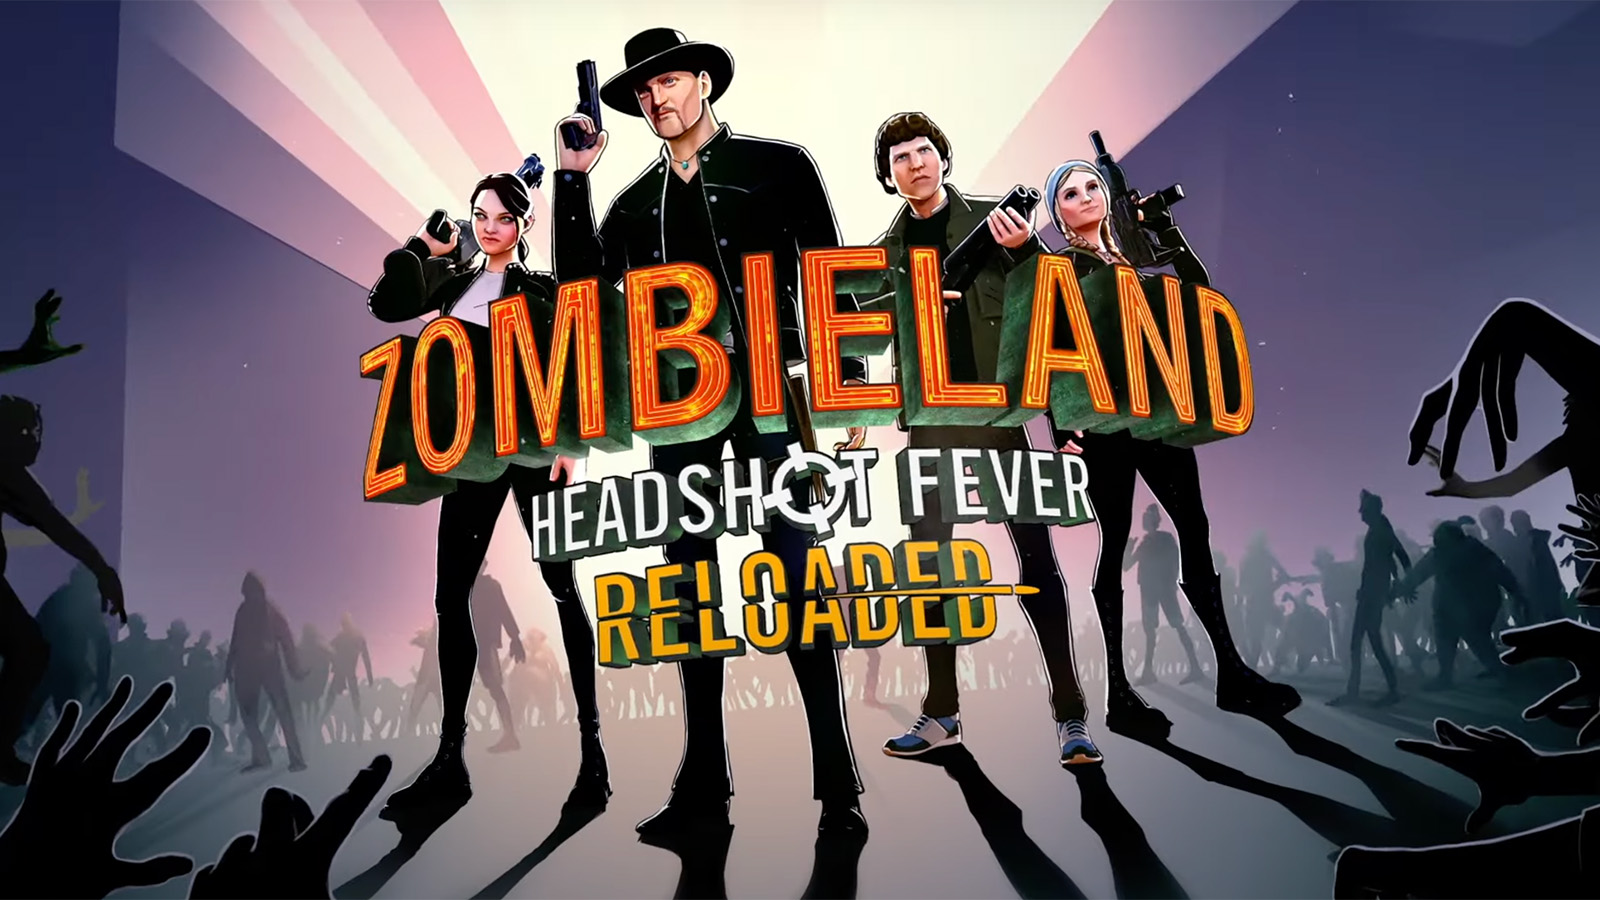 Zombieland: Headshot Fever Reloaded Gets Gruesome New PS VR2 Trailer